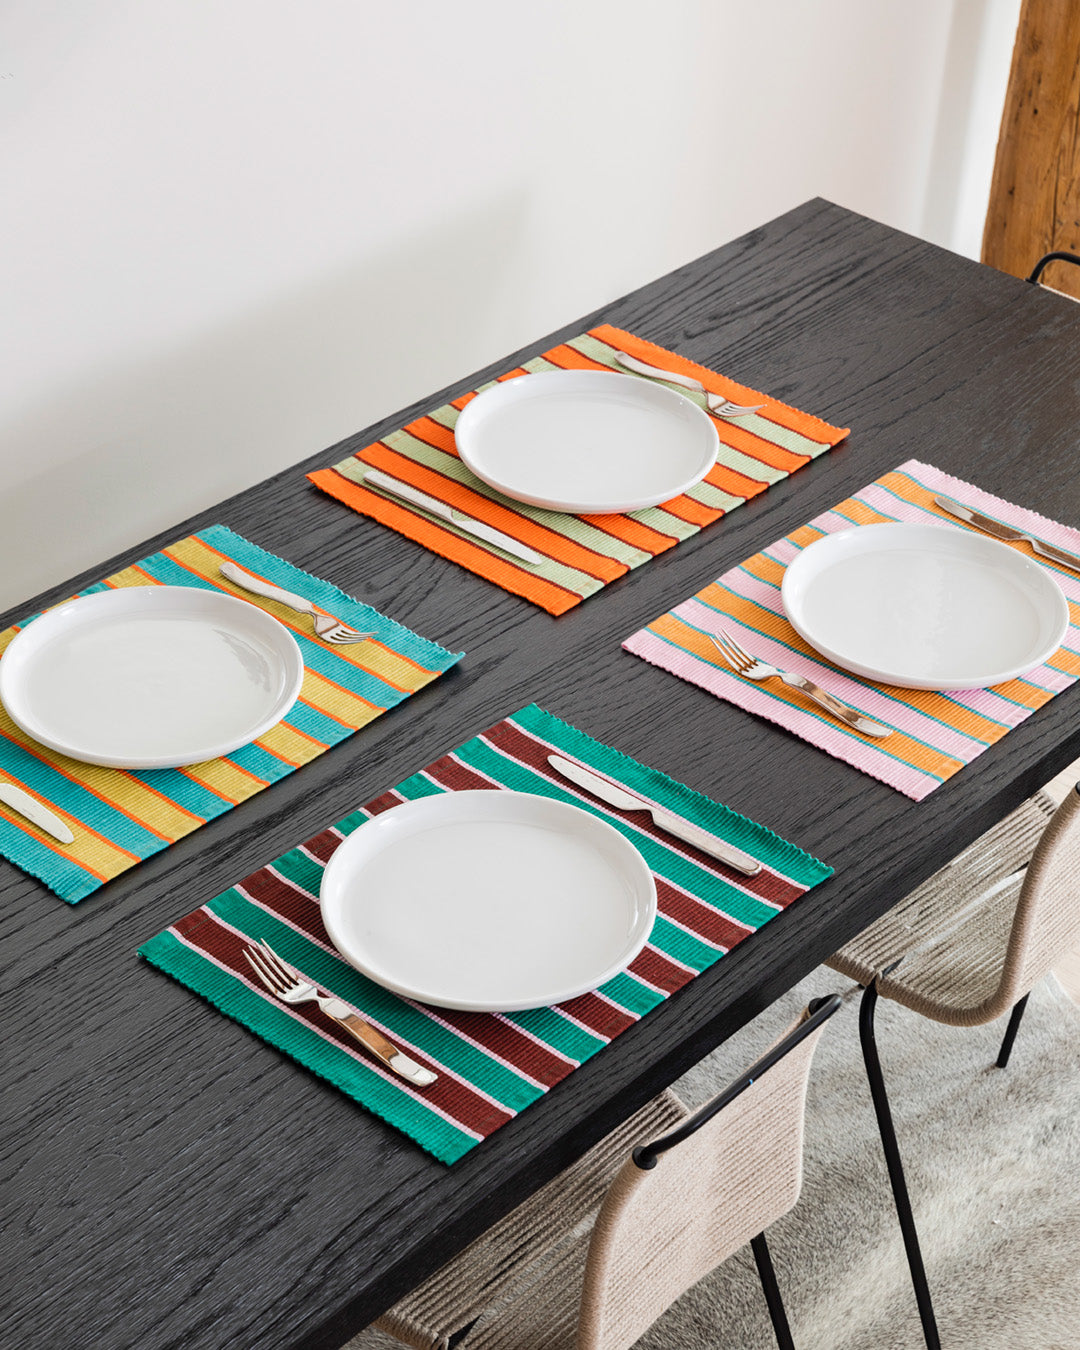 Dusen Dusen Set of Striped Placemats. Single or Set of 4 placemats in mix and match striped patterns. Cotton placemats in tri-color stripes with a ribbed texture. 100% cotton, 12" x 18". Machine wash cold and lay flat to dry. Spot clean as needed. Made in India.